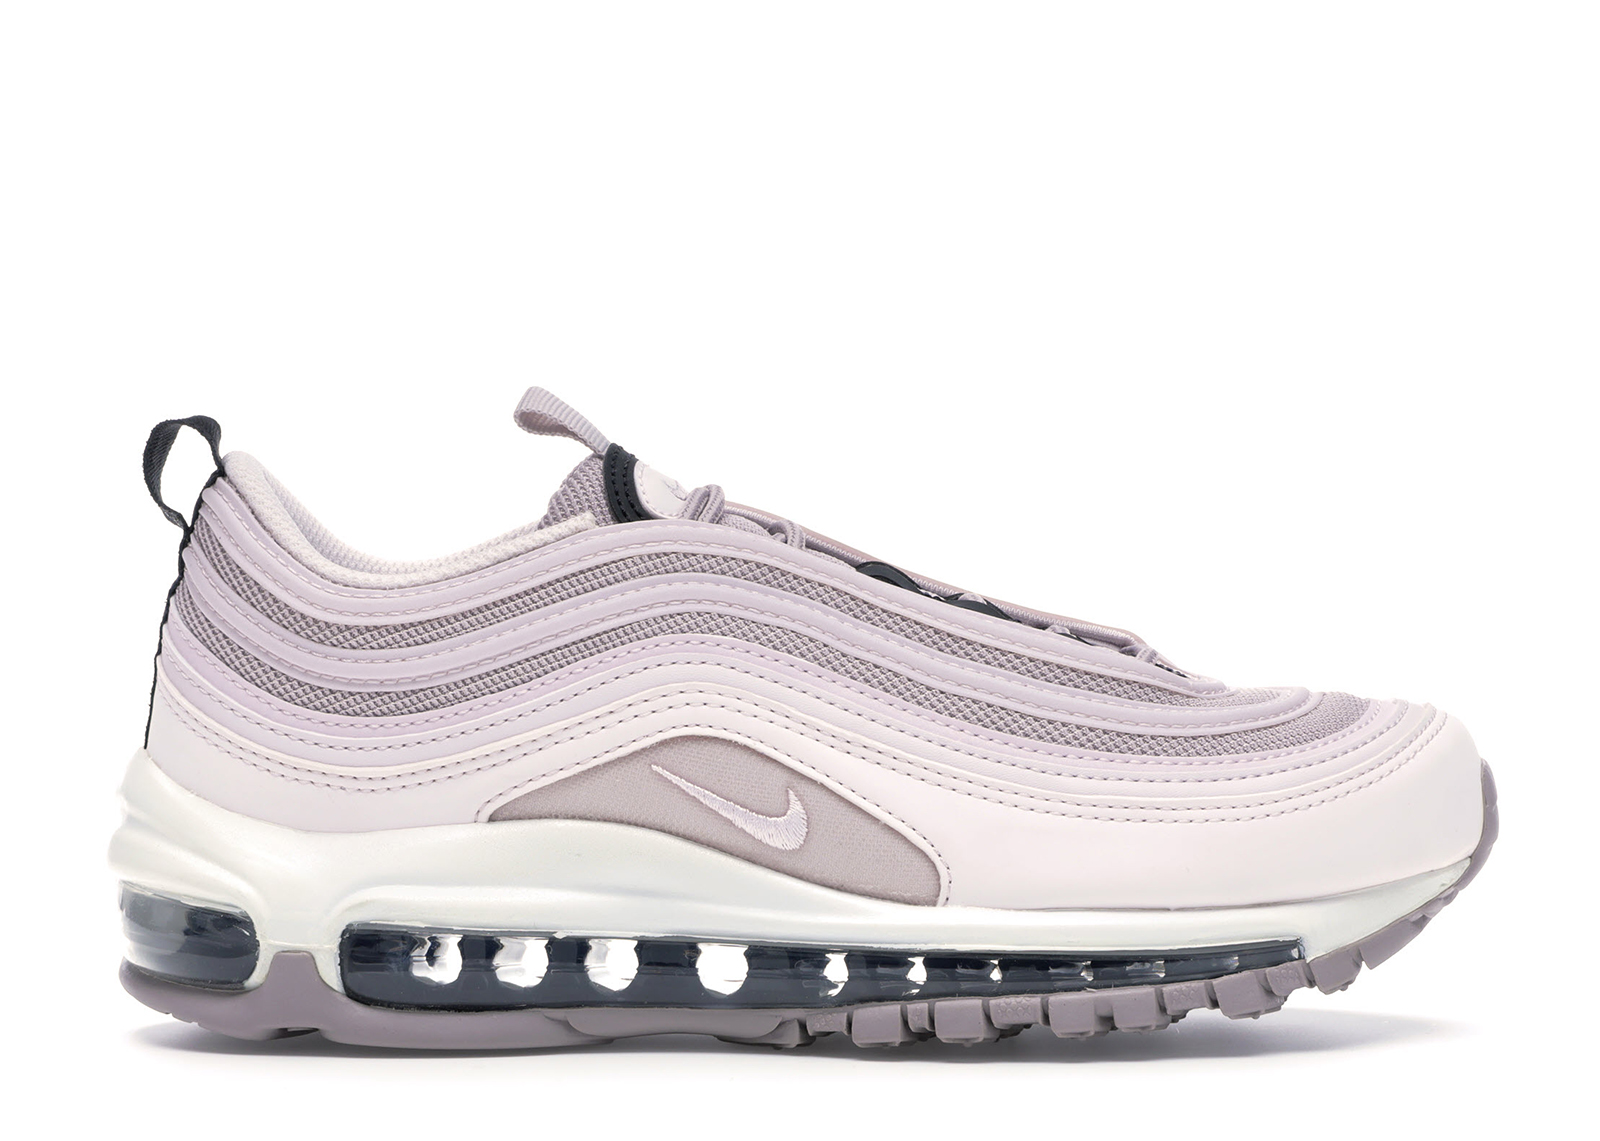 nike air max 97 purple and pink